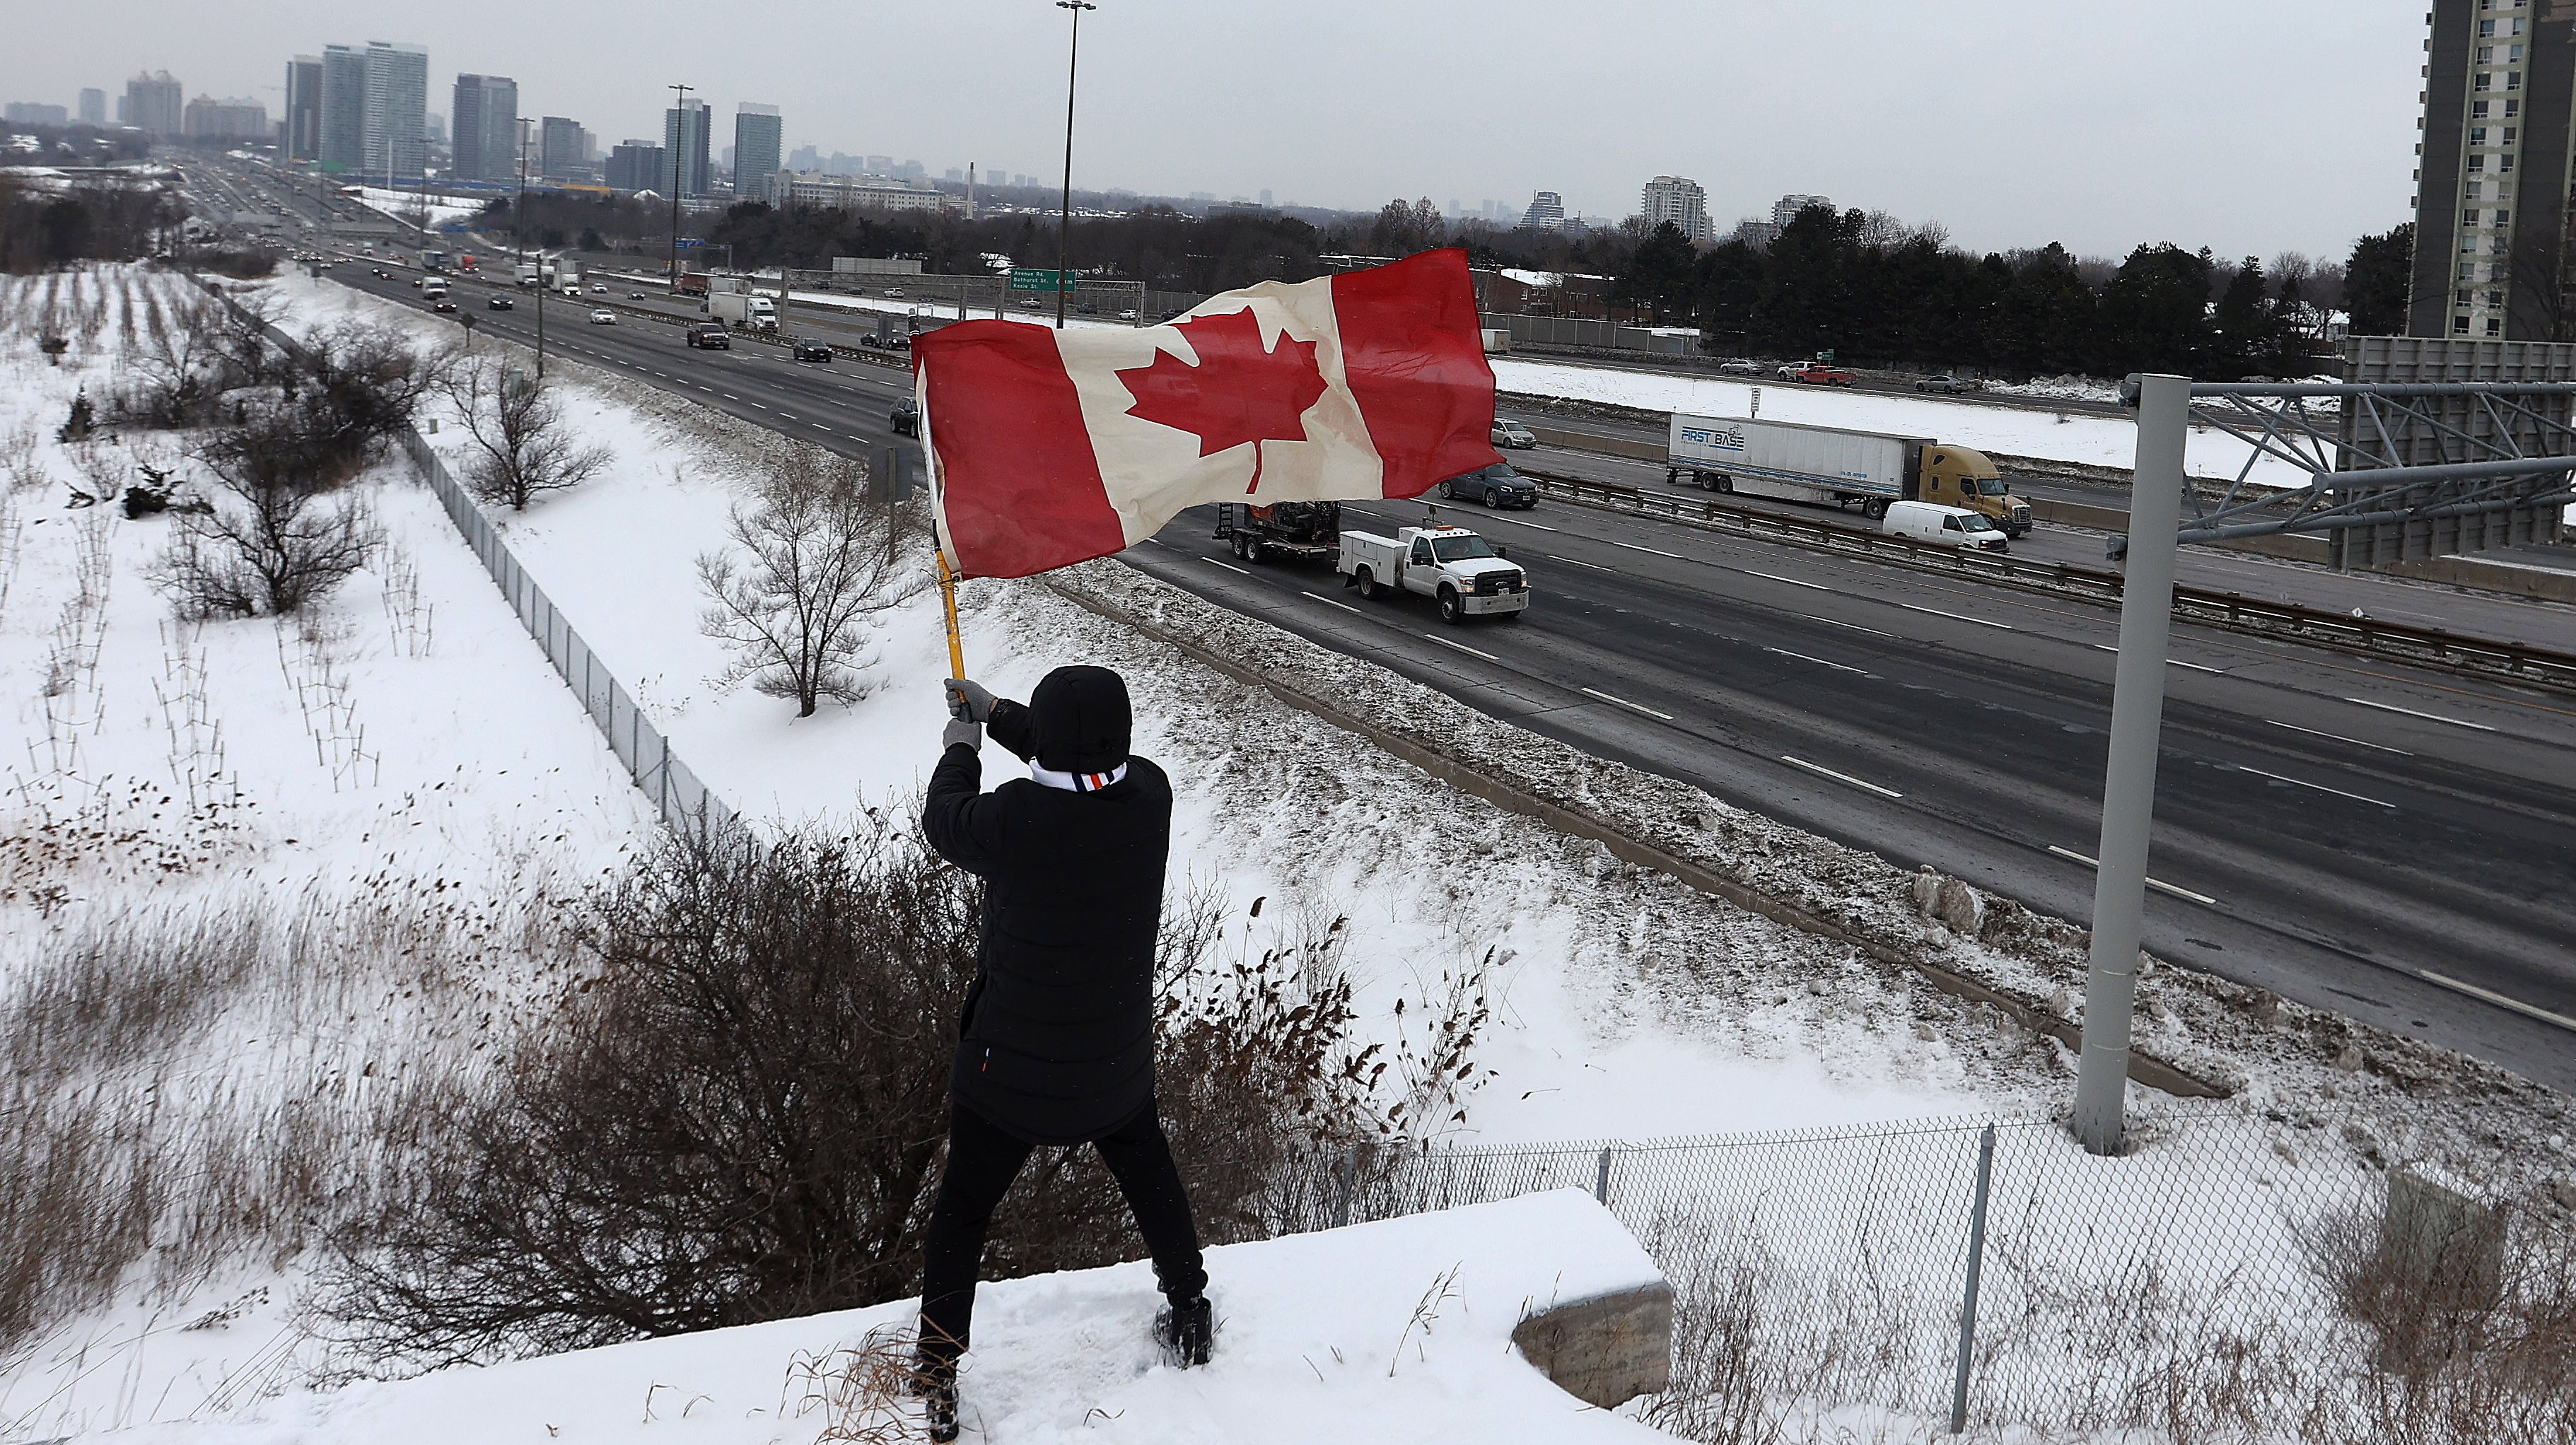 Protesters gather onto the Don Mills bridge over Highway 401 in a show of support for the Freedom Convoy of truckers on their way to Ottawa to protest vaccine mandates at the border